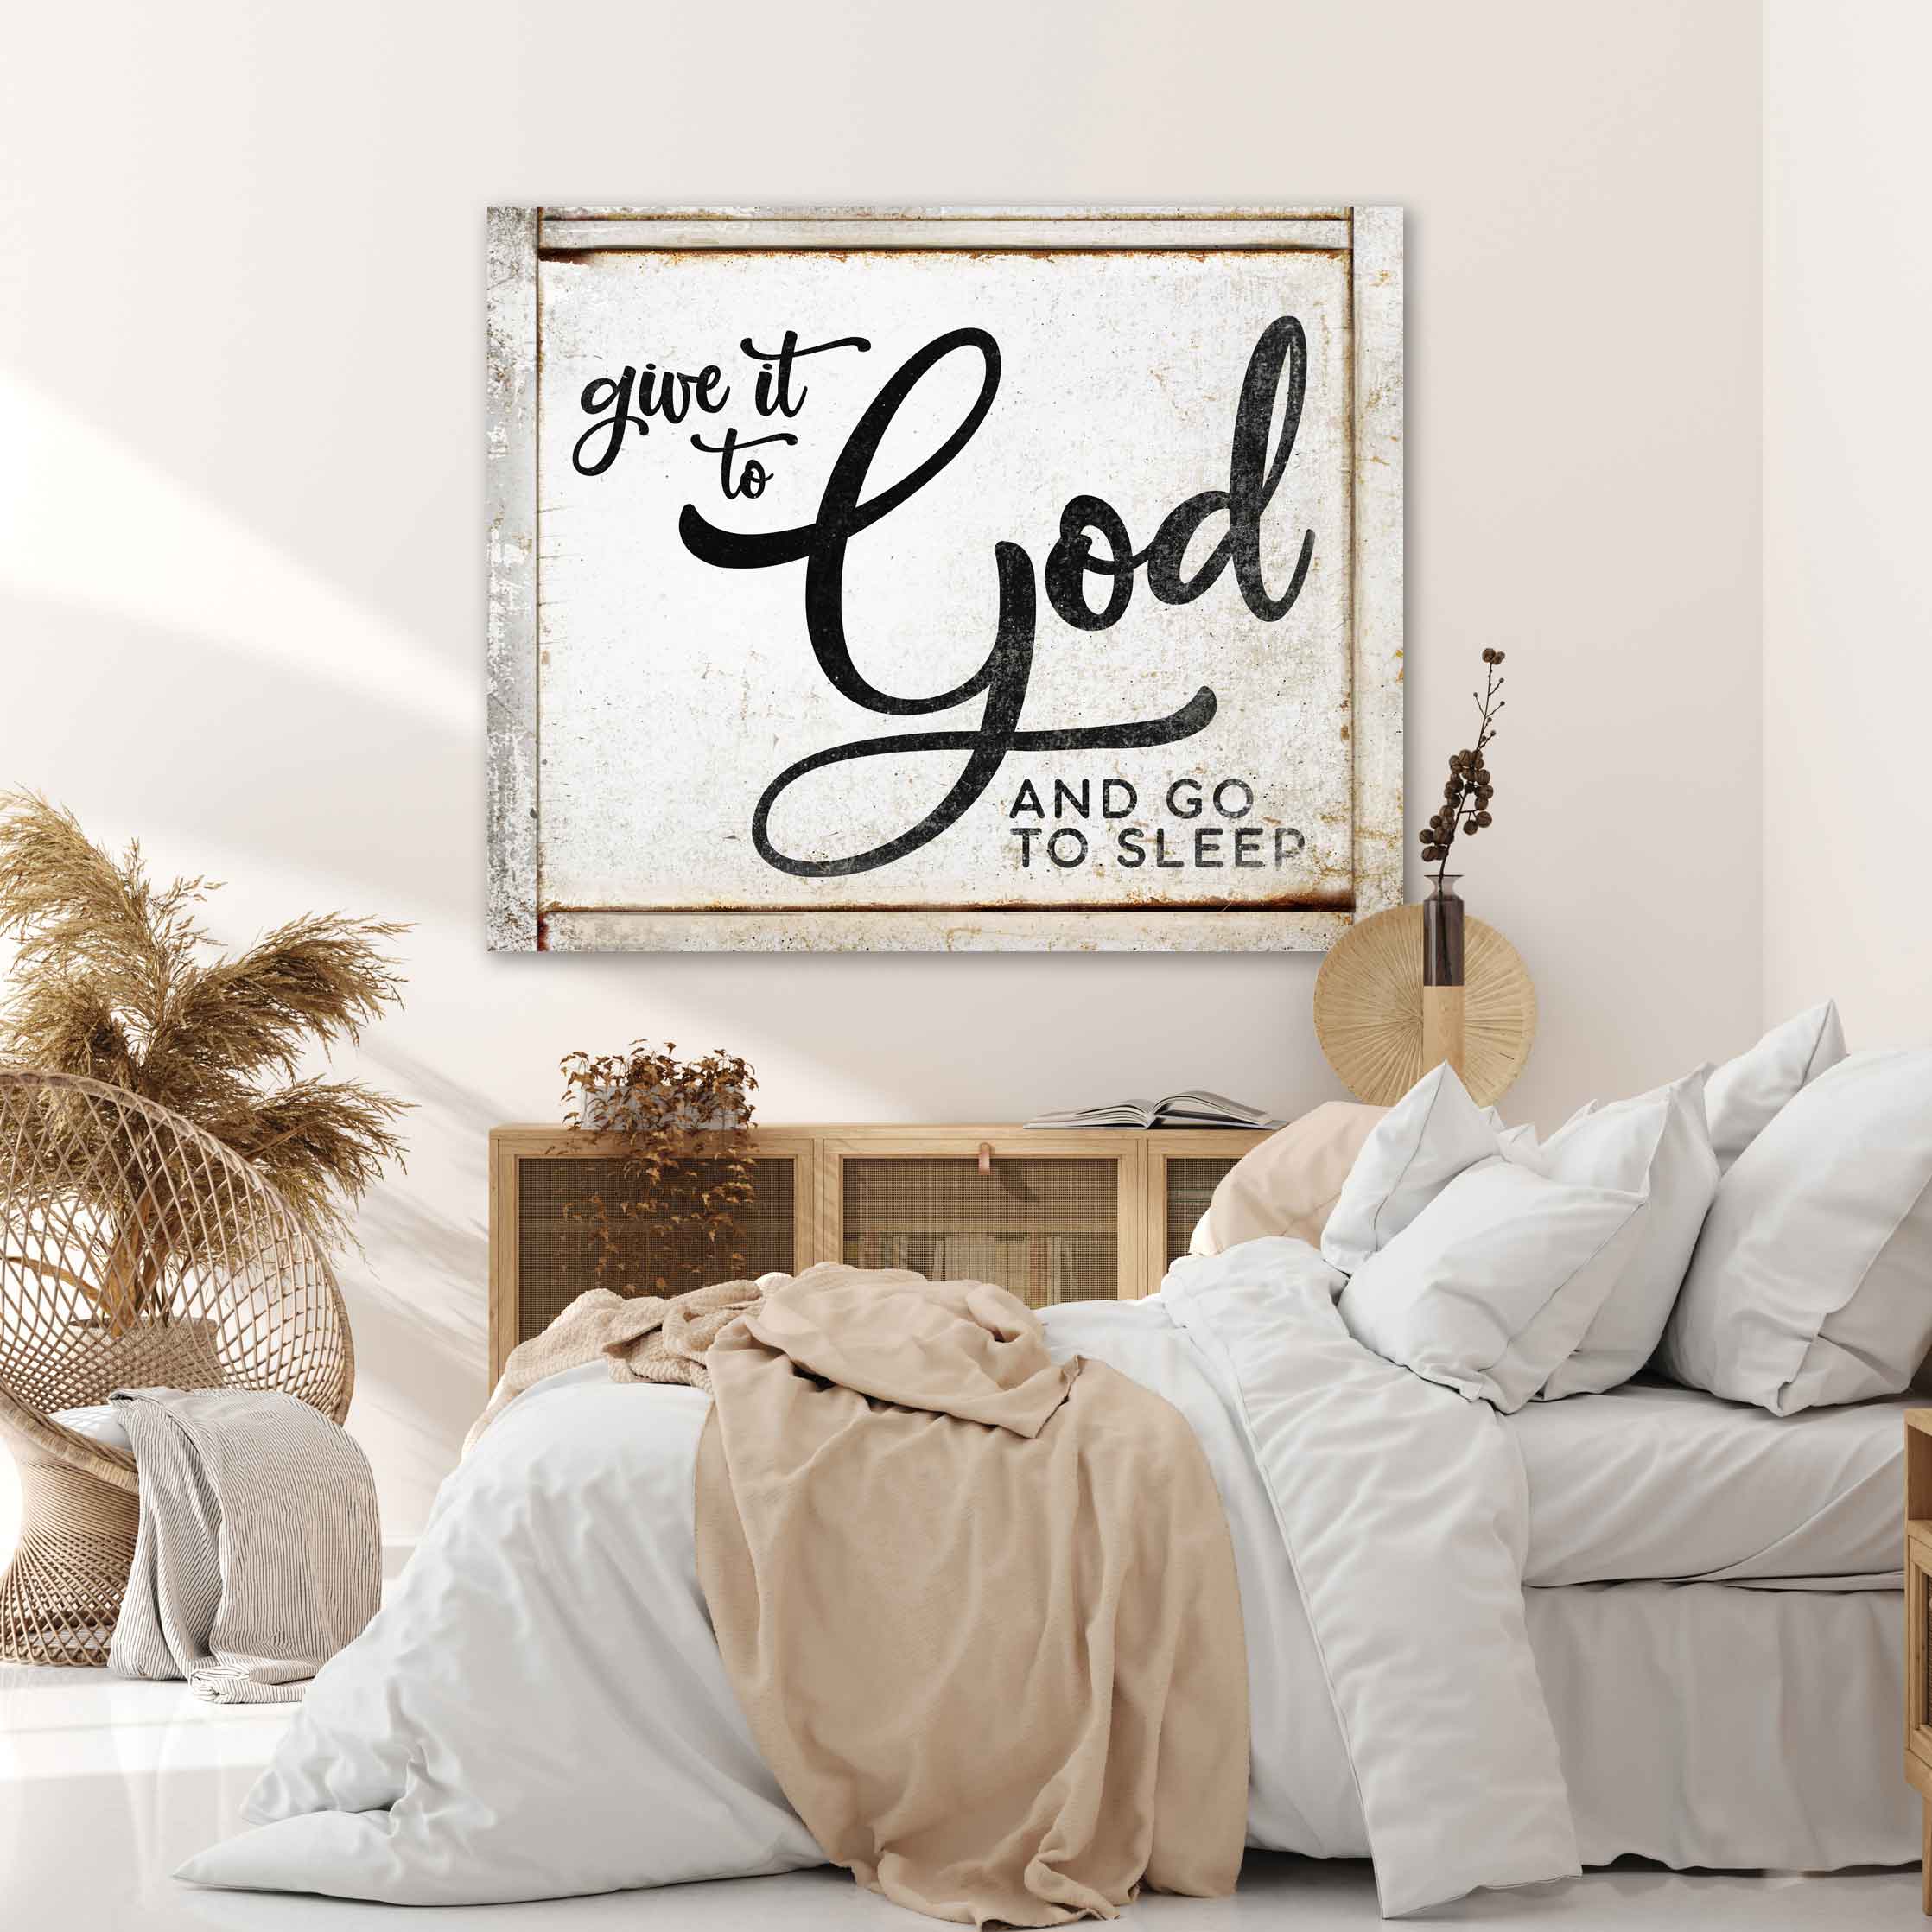 Give it to God and Go to sleep modern farmhouse French style custom canvas sign